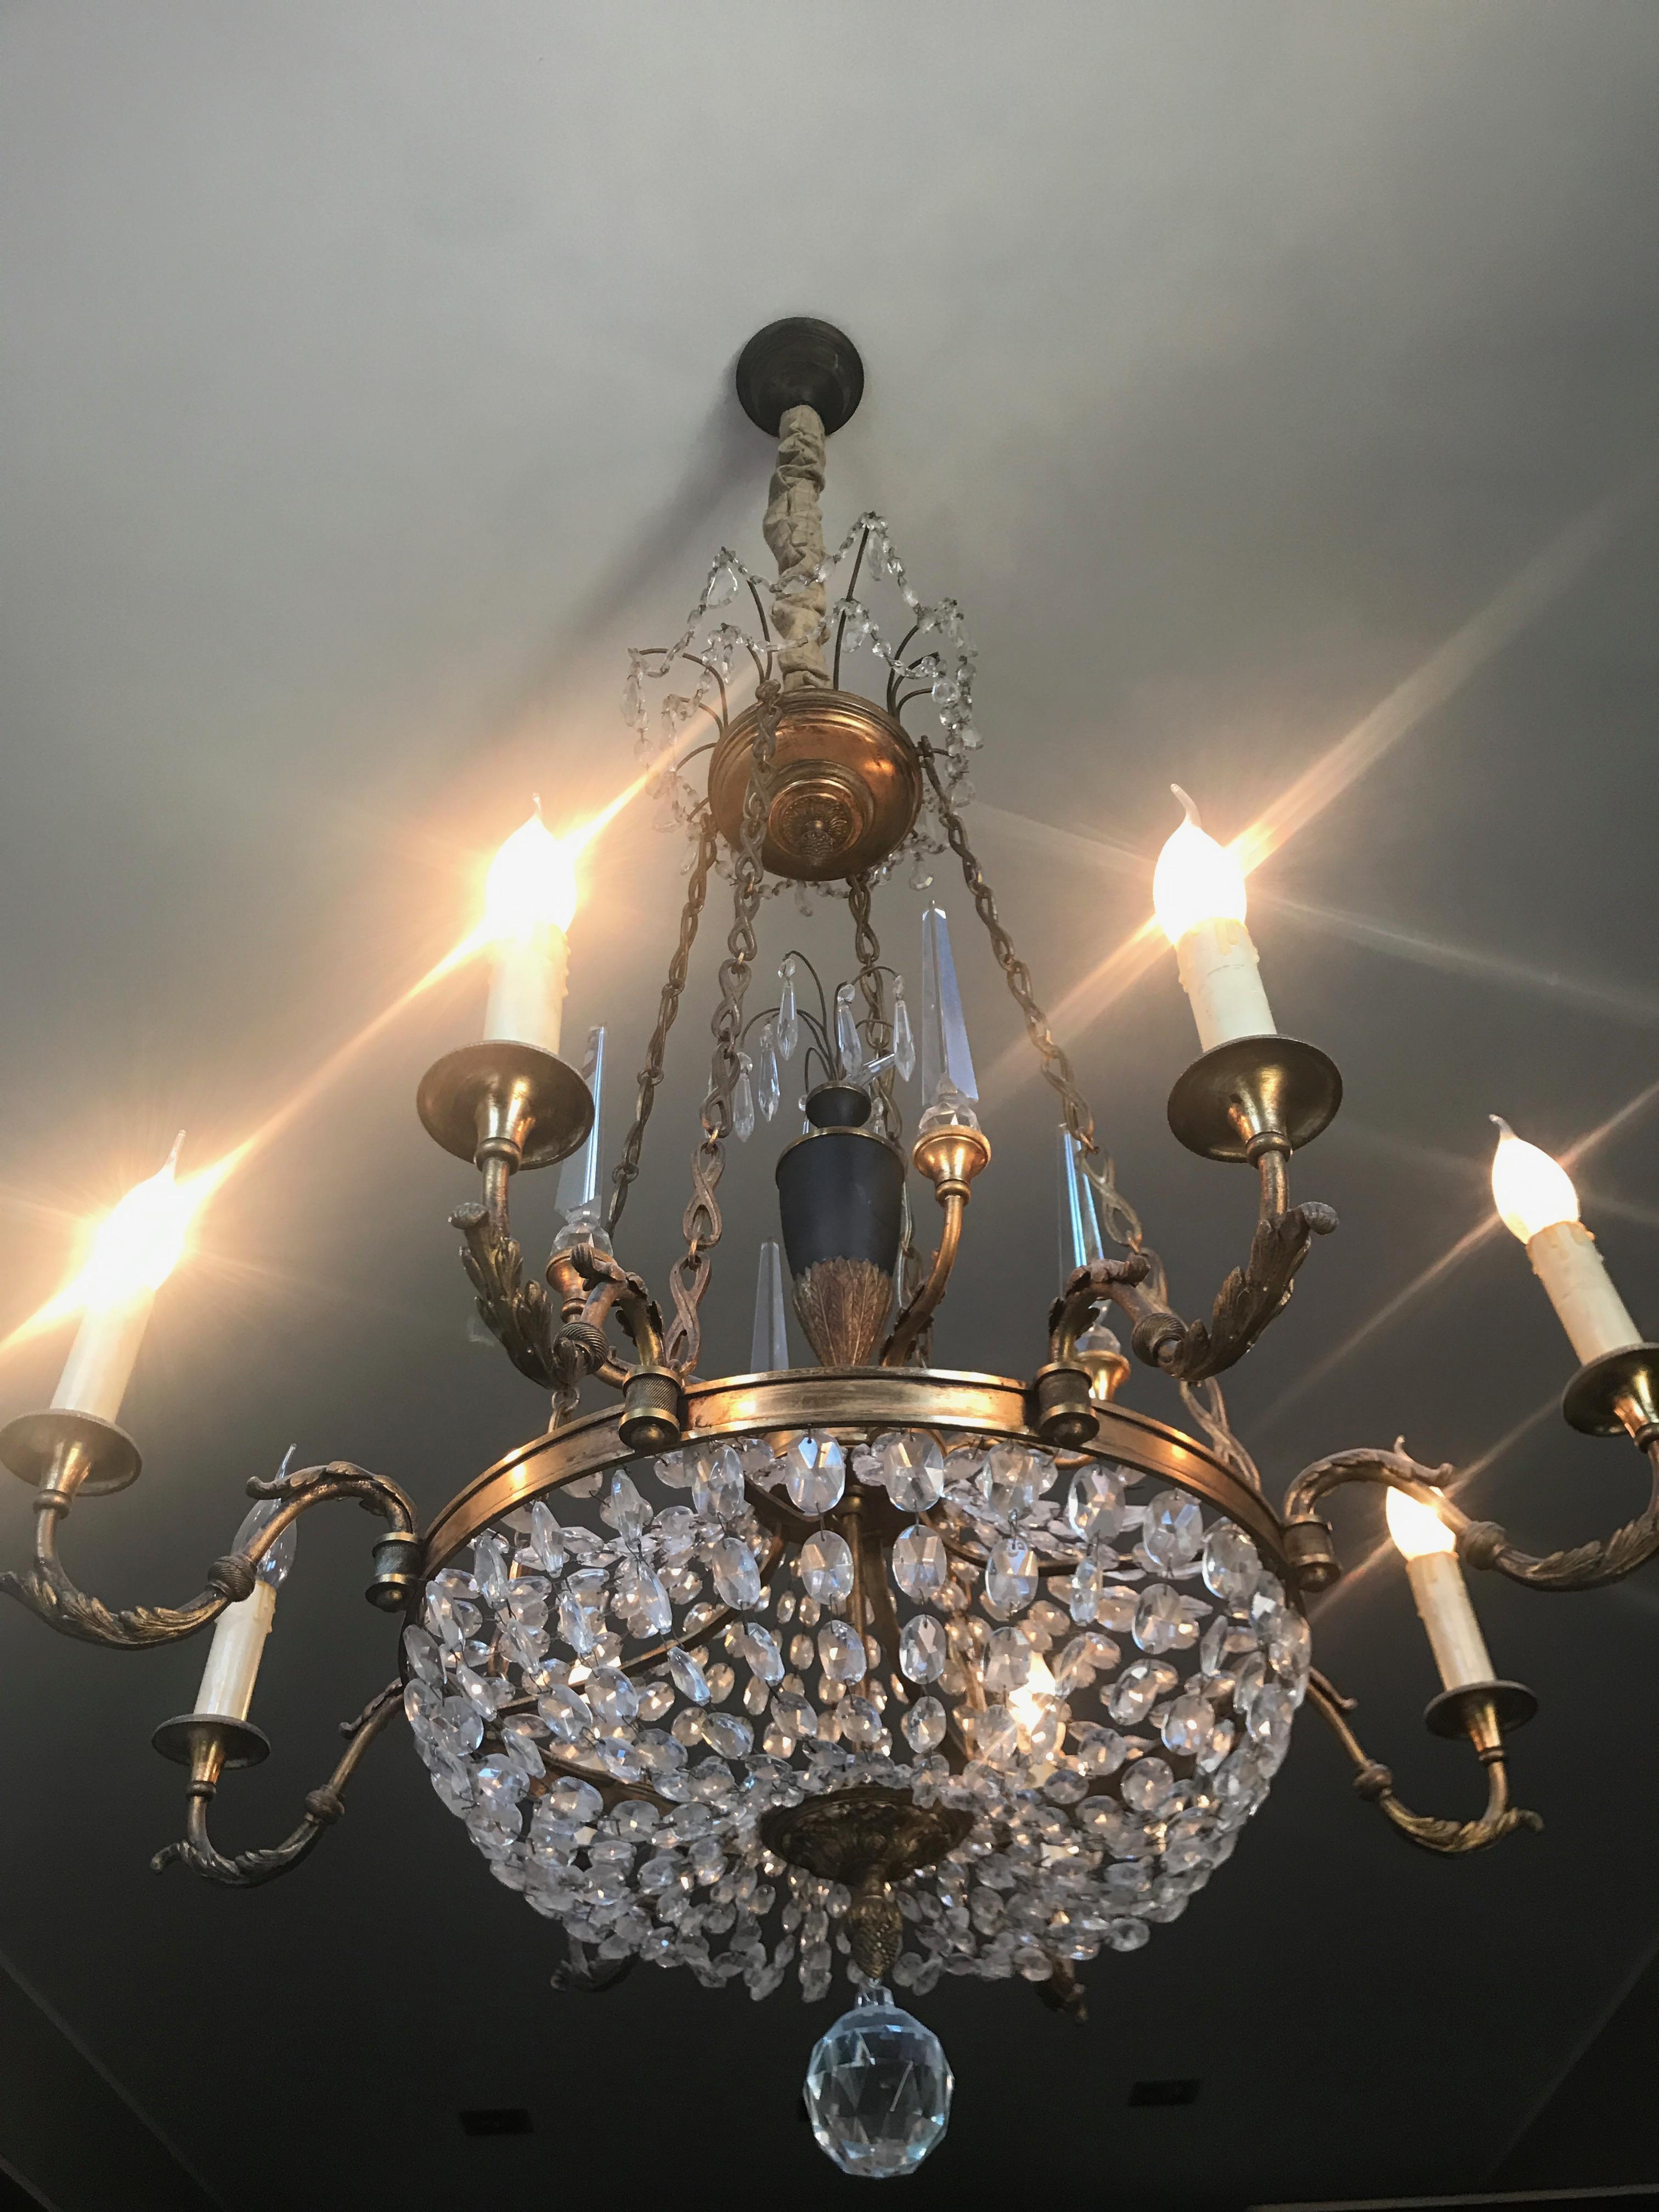 Exceptionally elegant enamel and doré bronze chandelier adorned with cut crystal spires and swags of beads. The stunning solid crystal spires act to reflect the light and cast rainbows on the walls when the day light sun filters thru them. This